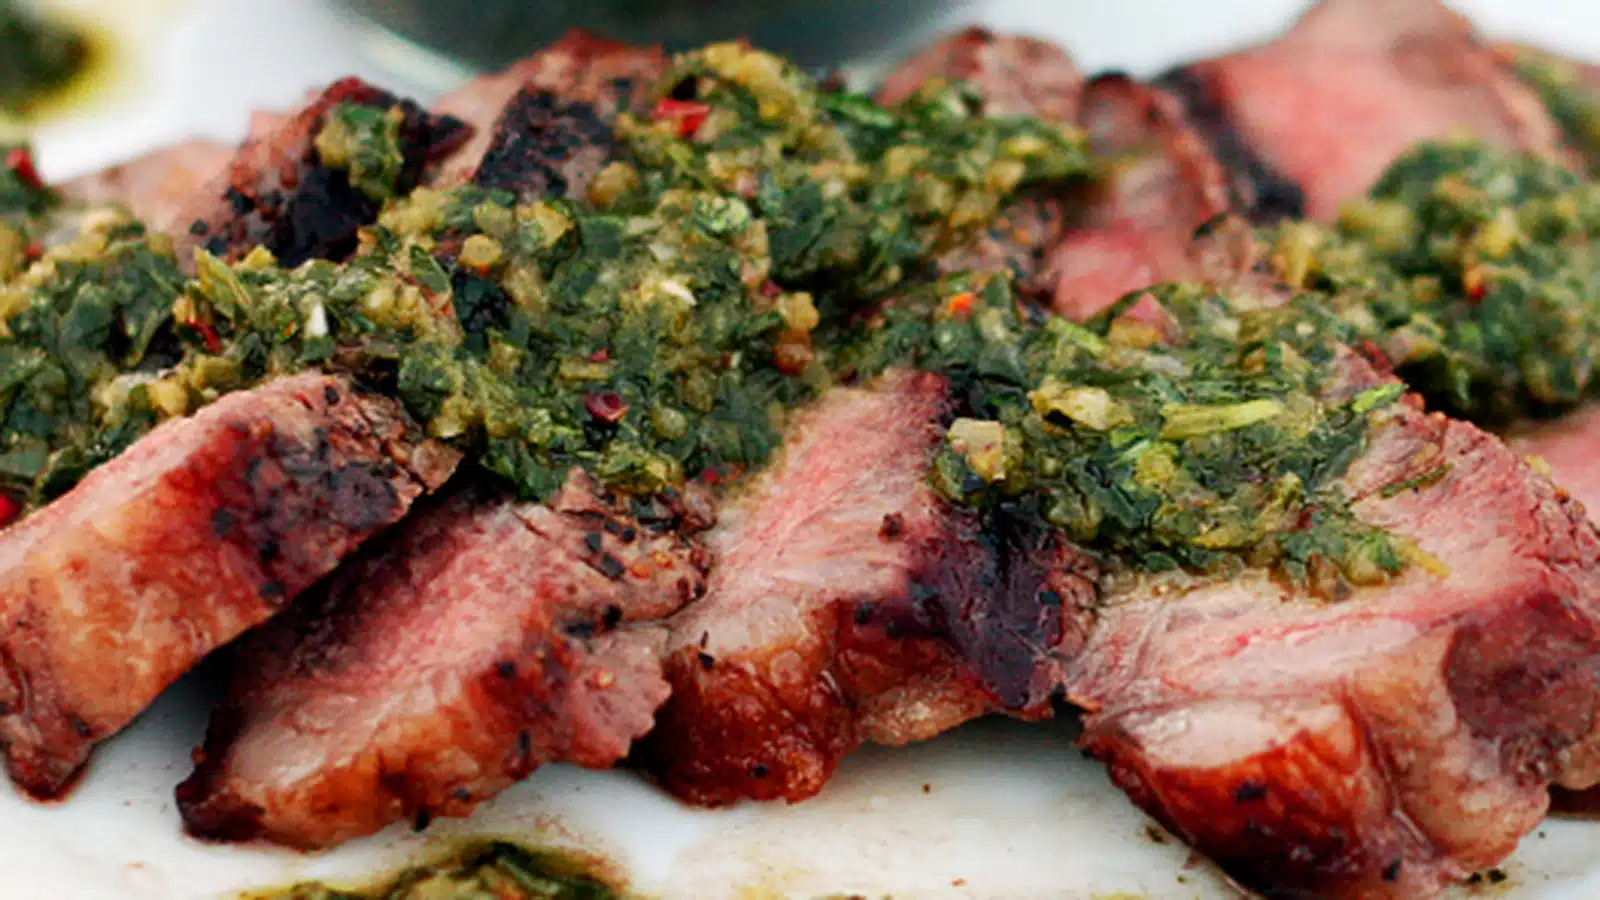 Chimichurri crusted ny strip loin from Frazie's Meat & Market